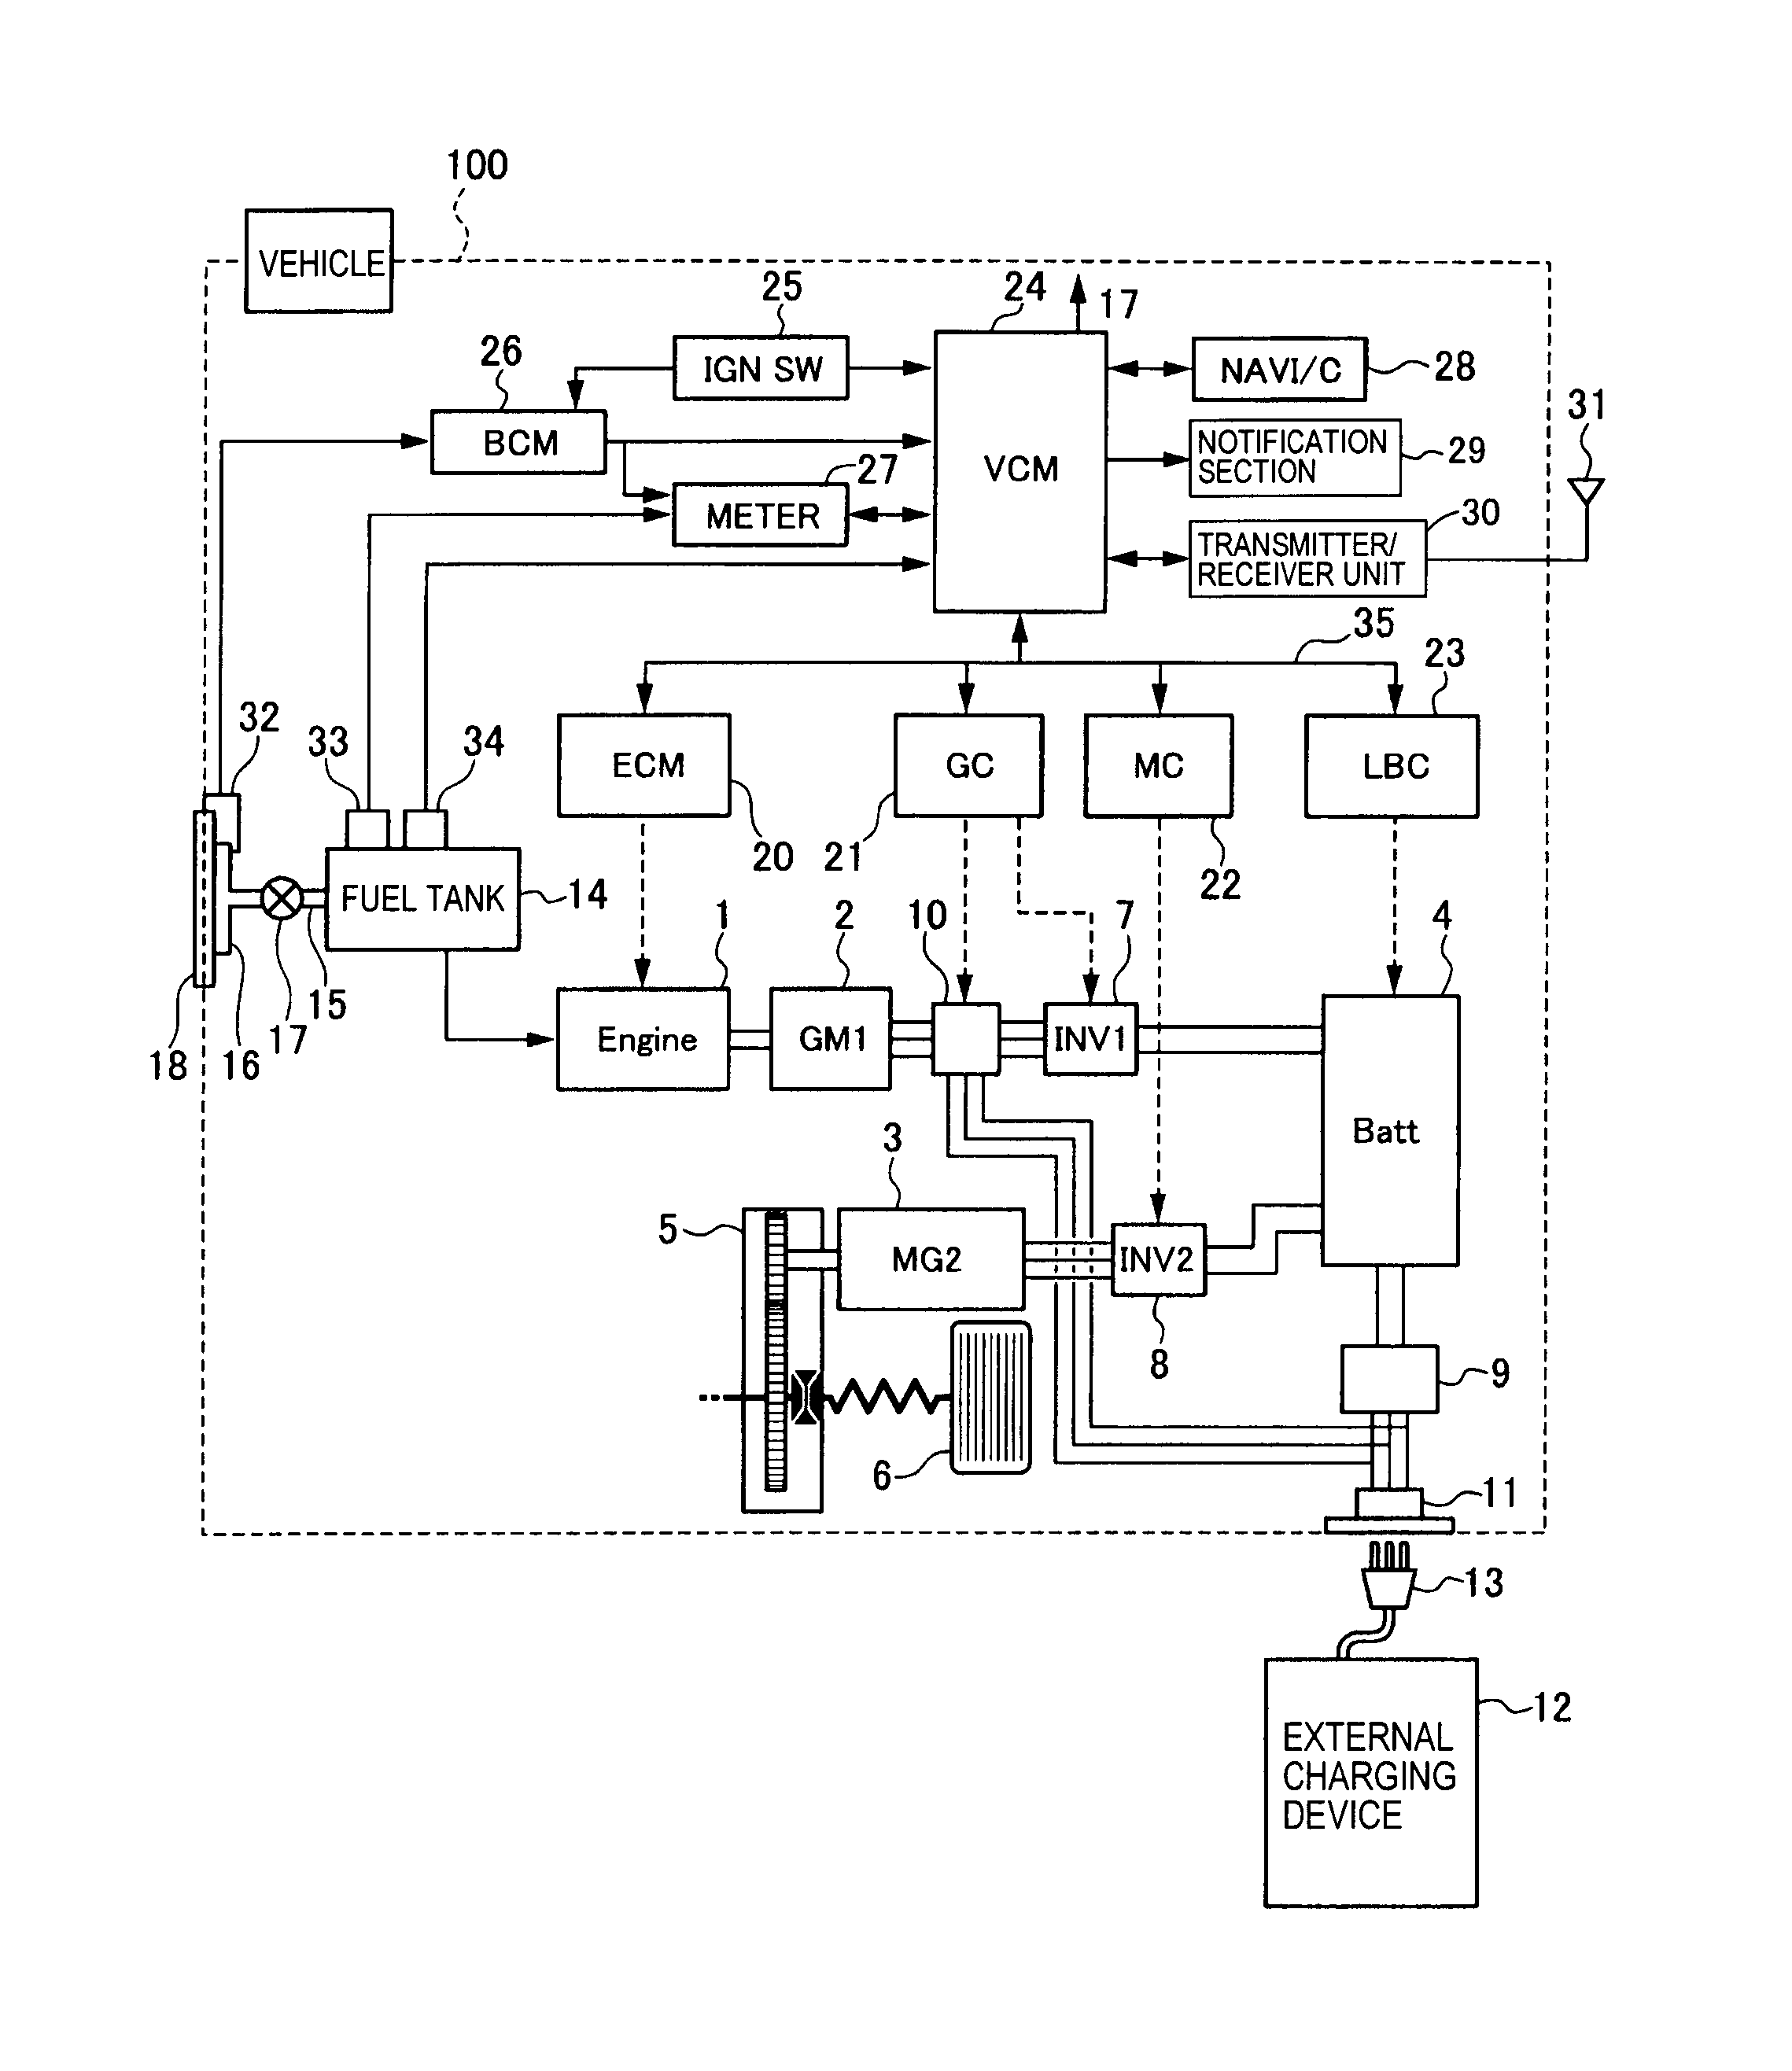 white-rodgers 50t35-730 wiring diagram